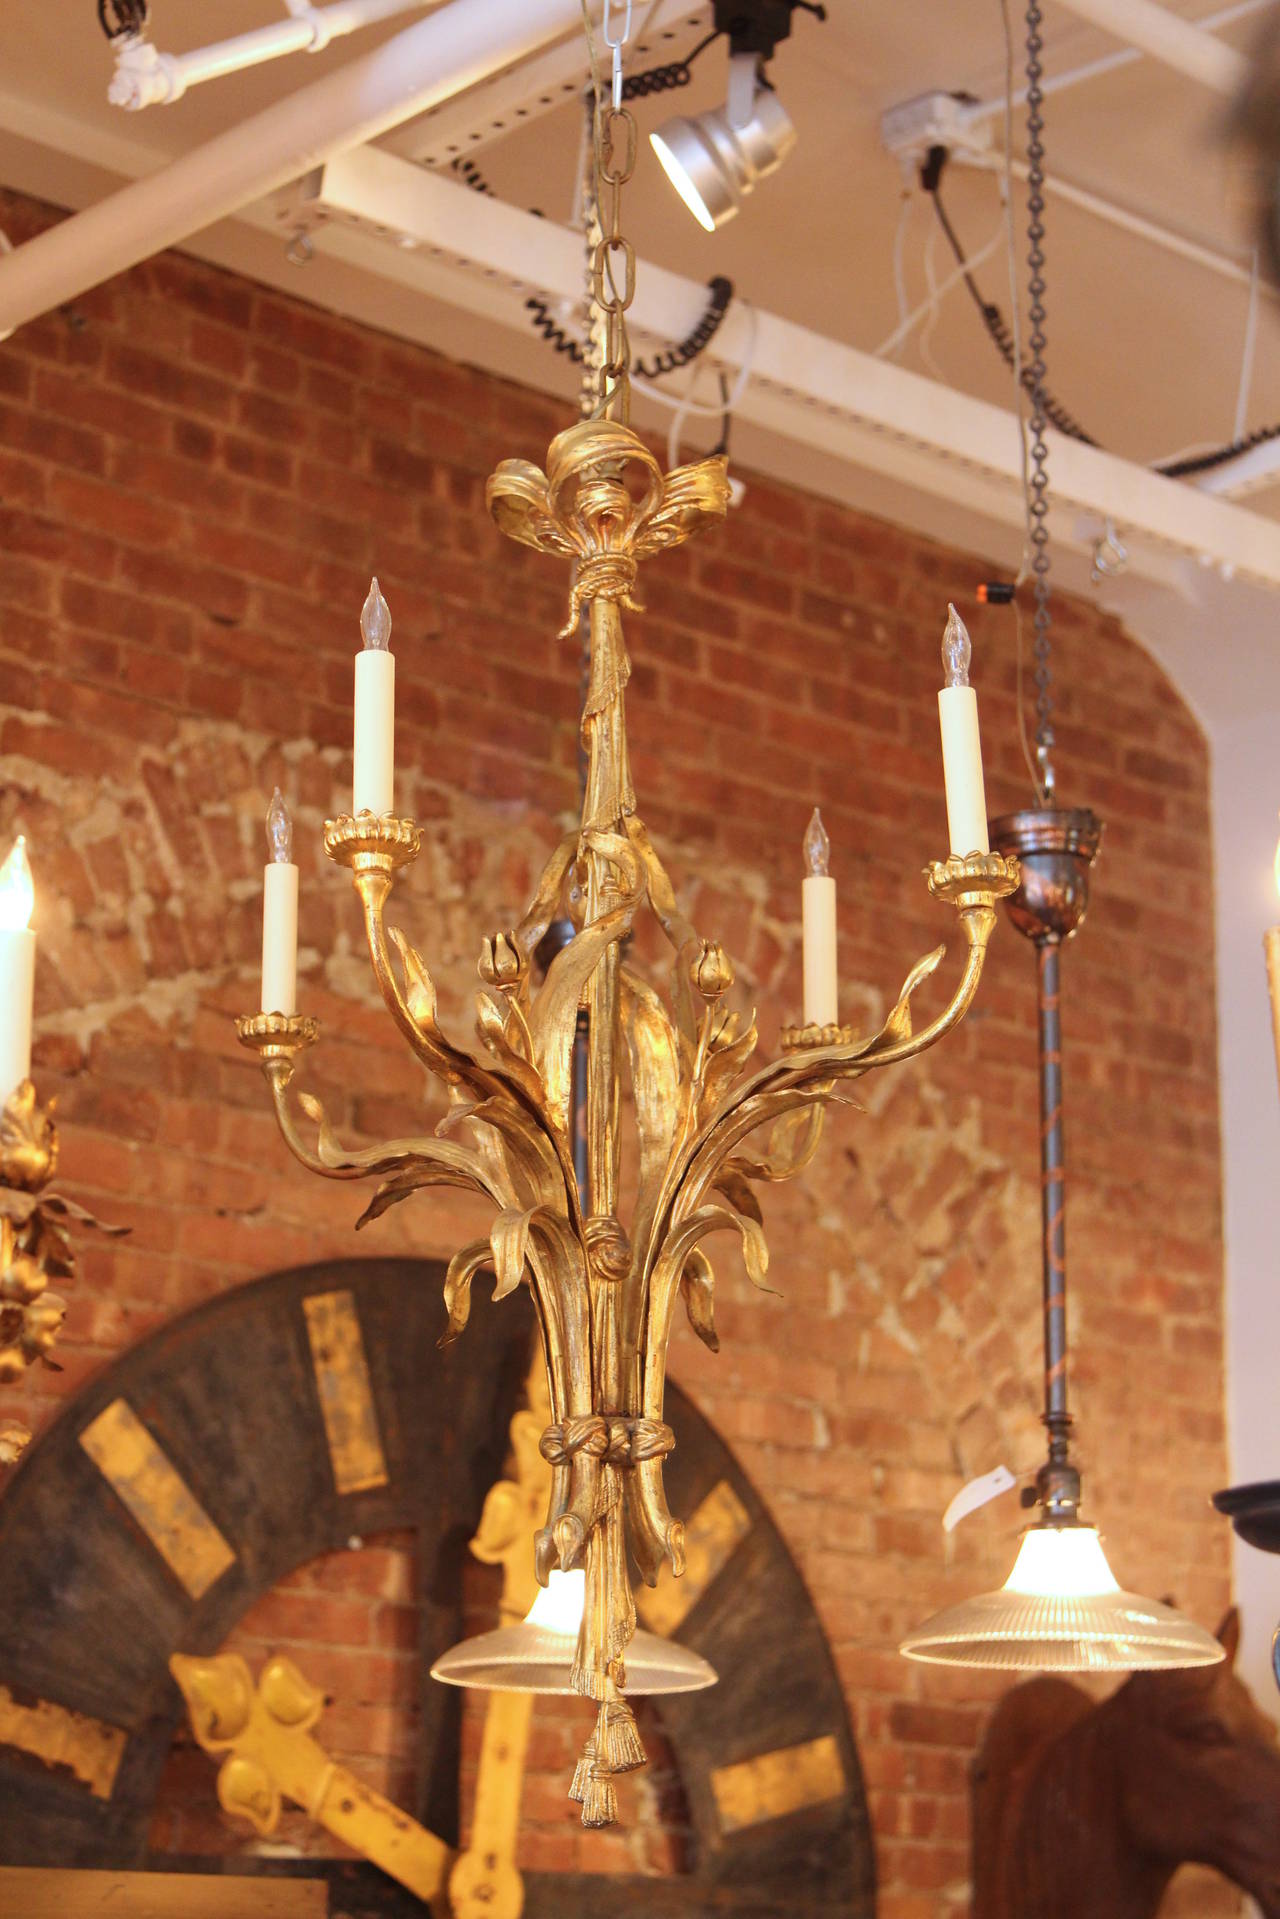 This chandelier is fashioned out of ormolu bronze. Detailing on the hanging fixture includes flowers, leaves, a serpent, braided rope, ribbons, tassels and four lights. Made in France in the 1900s. This item can be viewed at our 302 Bowery location